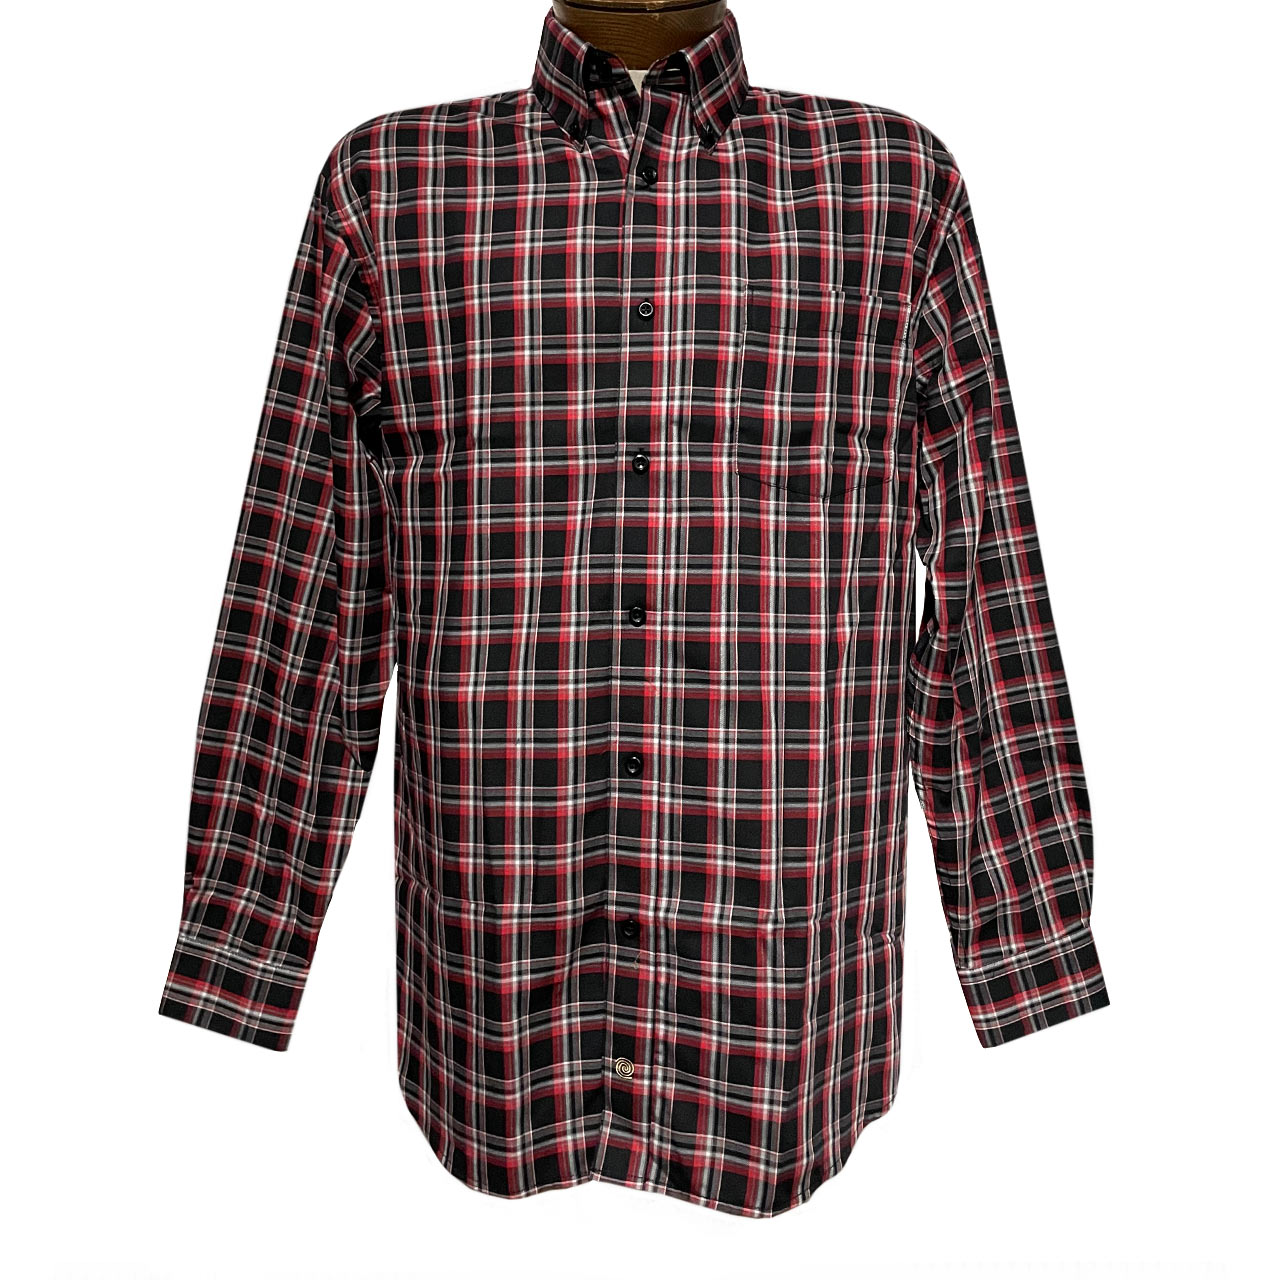 Men's F/X Fusion Long Sleeve Twill Plaid Wrinkle Resistant Woven Sport Shirt #D1710, Black/Red/Charcoal